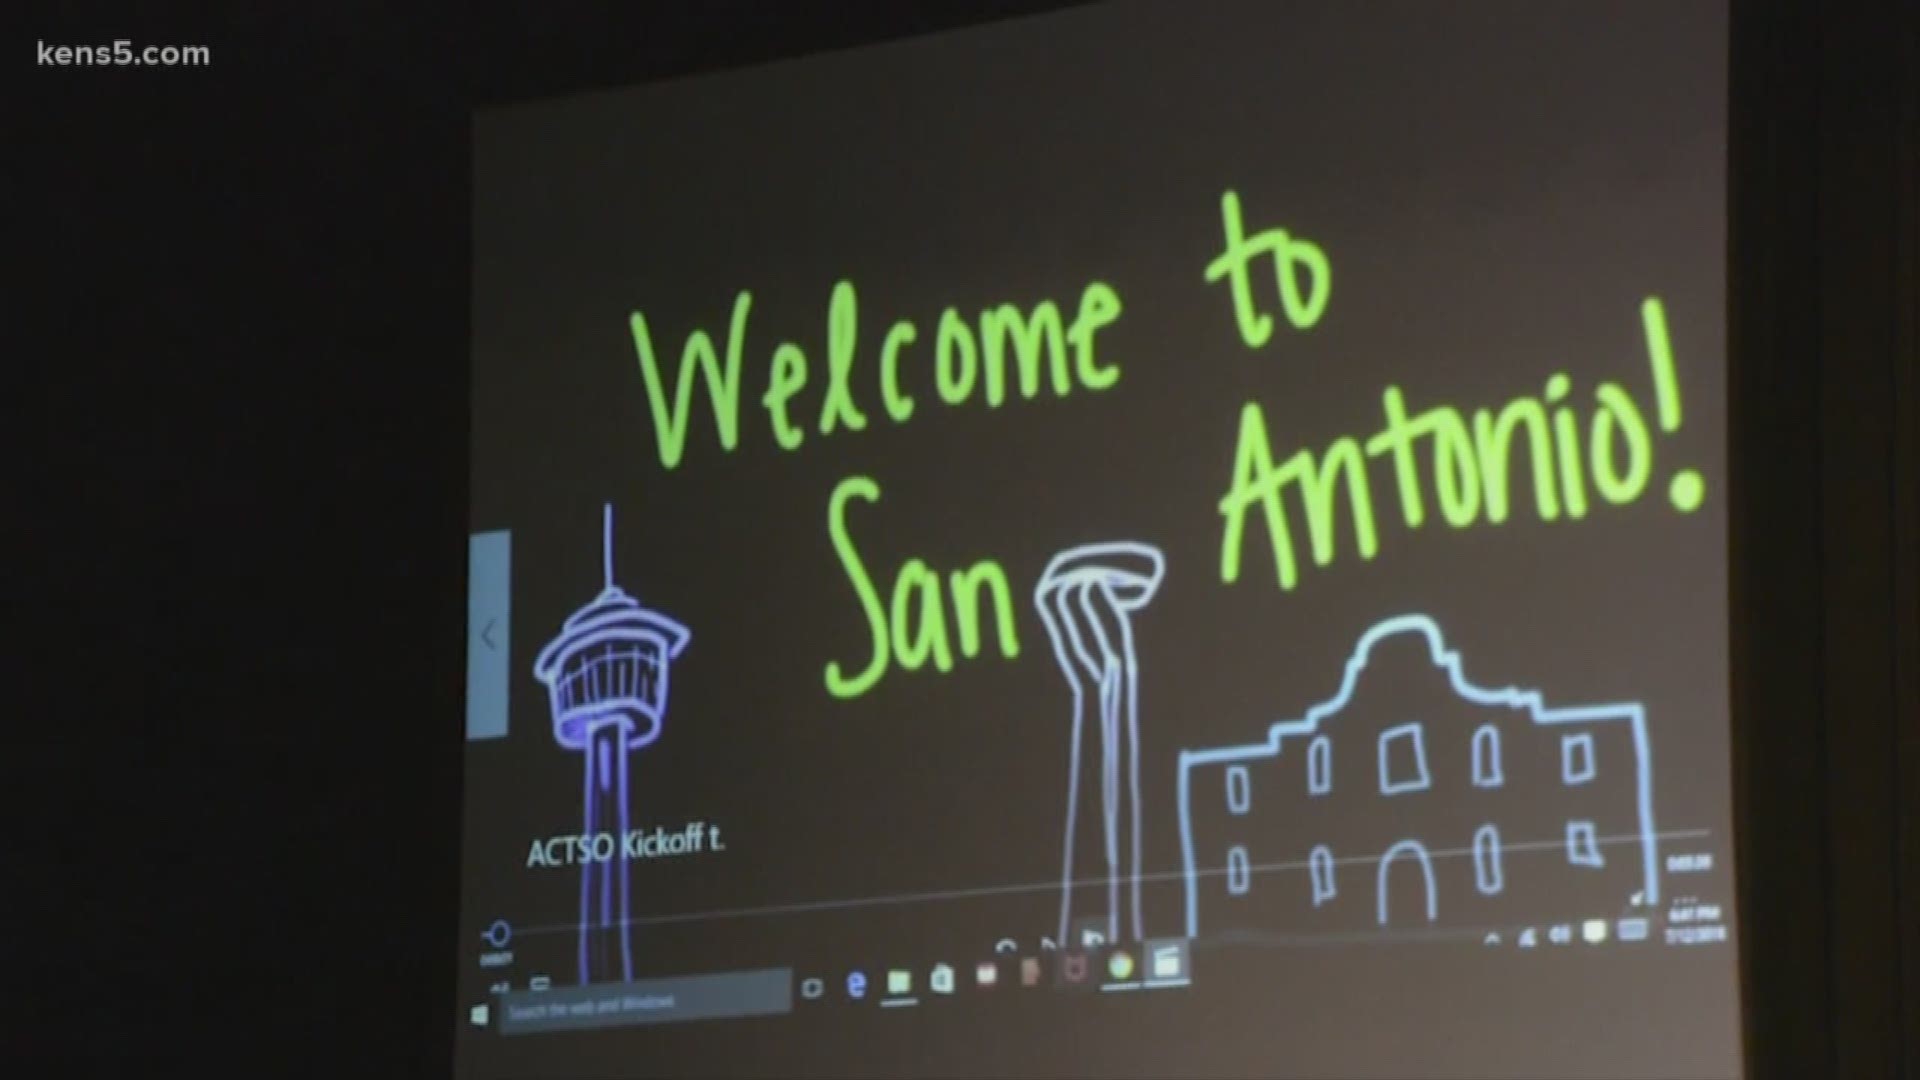 San Antonio made history on Thursday night. The Alamo City kicked off hosting its first NAACP Convention.